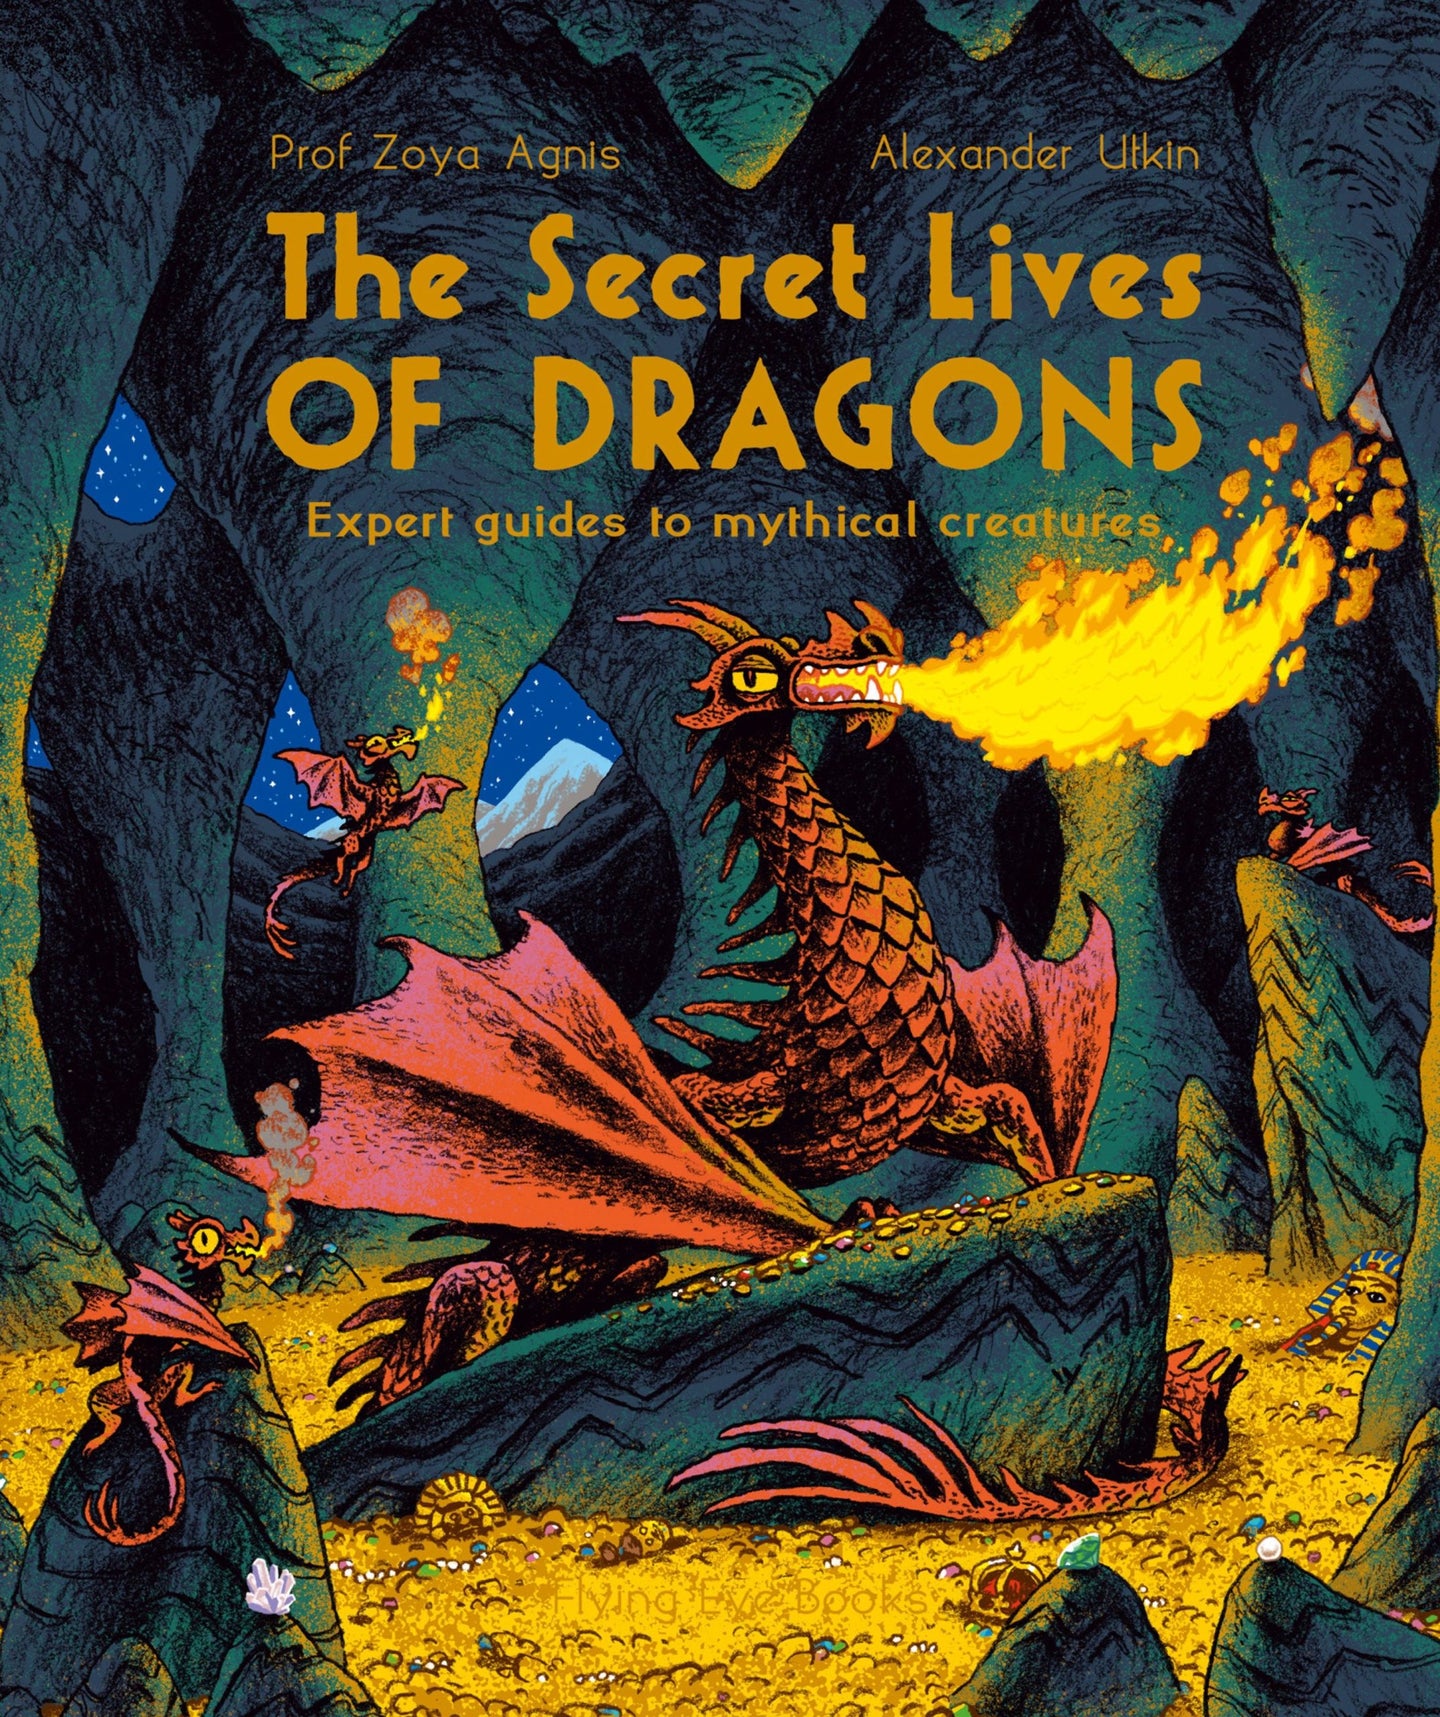 The Secret Lives of Dragons: Expert Guides to Mythical Creatures (Paperback)